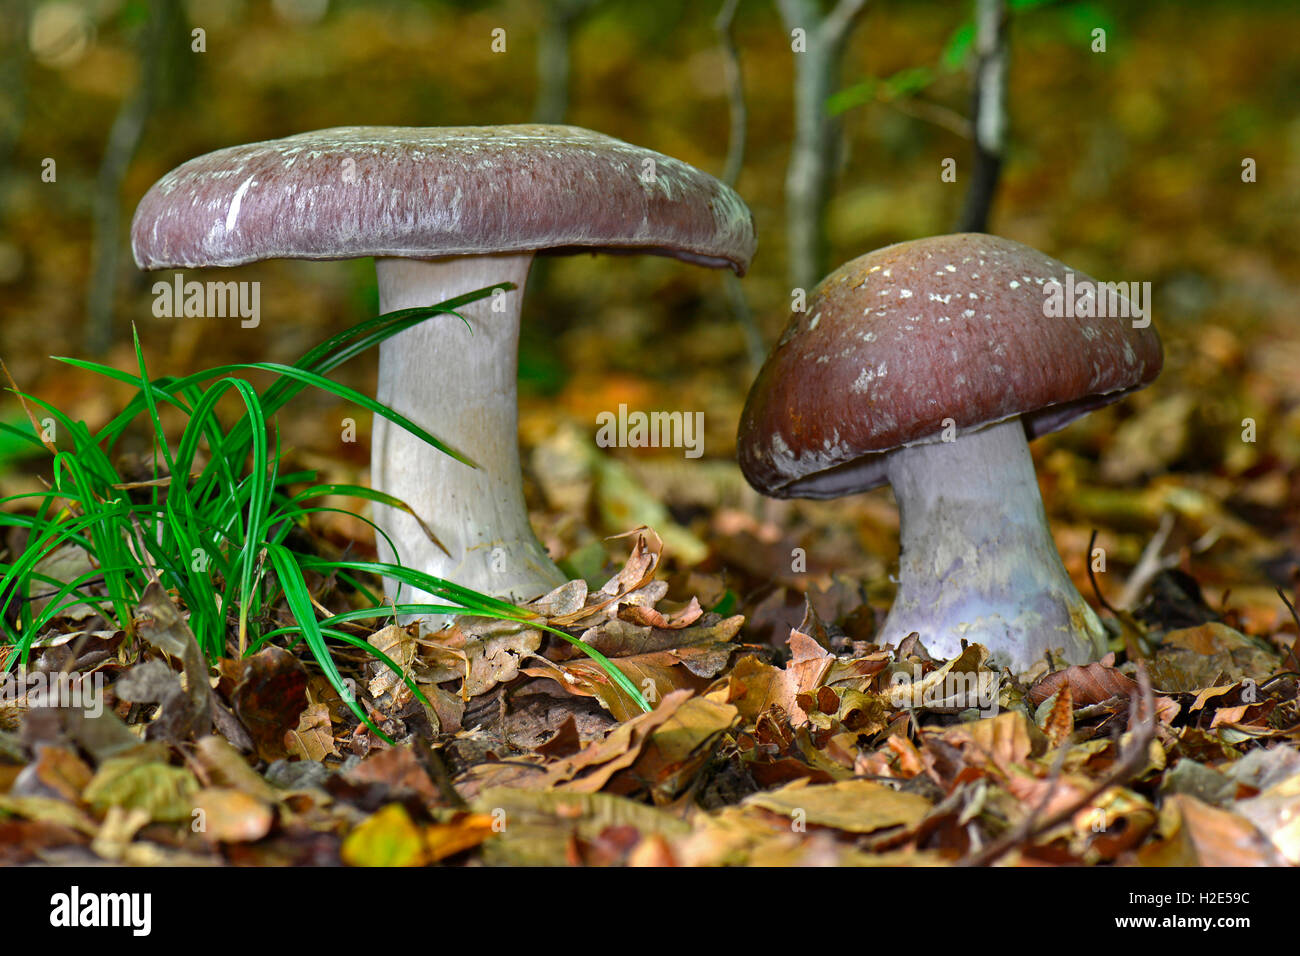 Goliath Webcap (Cortinarius praestans). Fruiting bodies on the forest floor. Germany Stock Photo